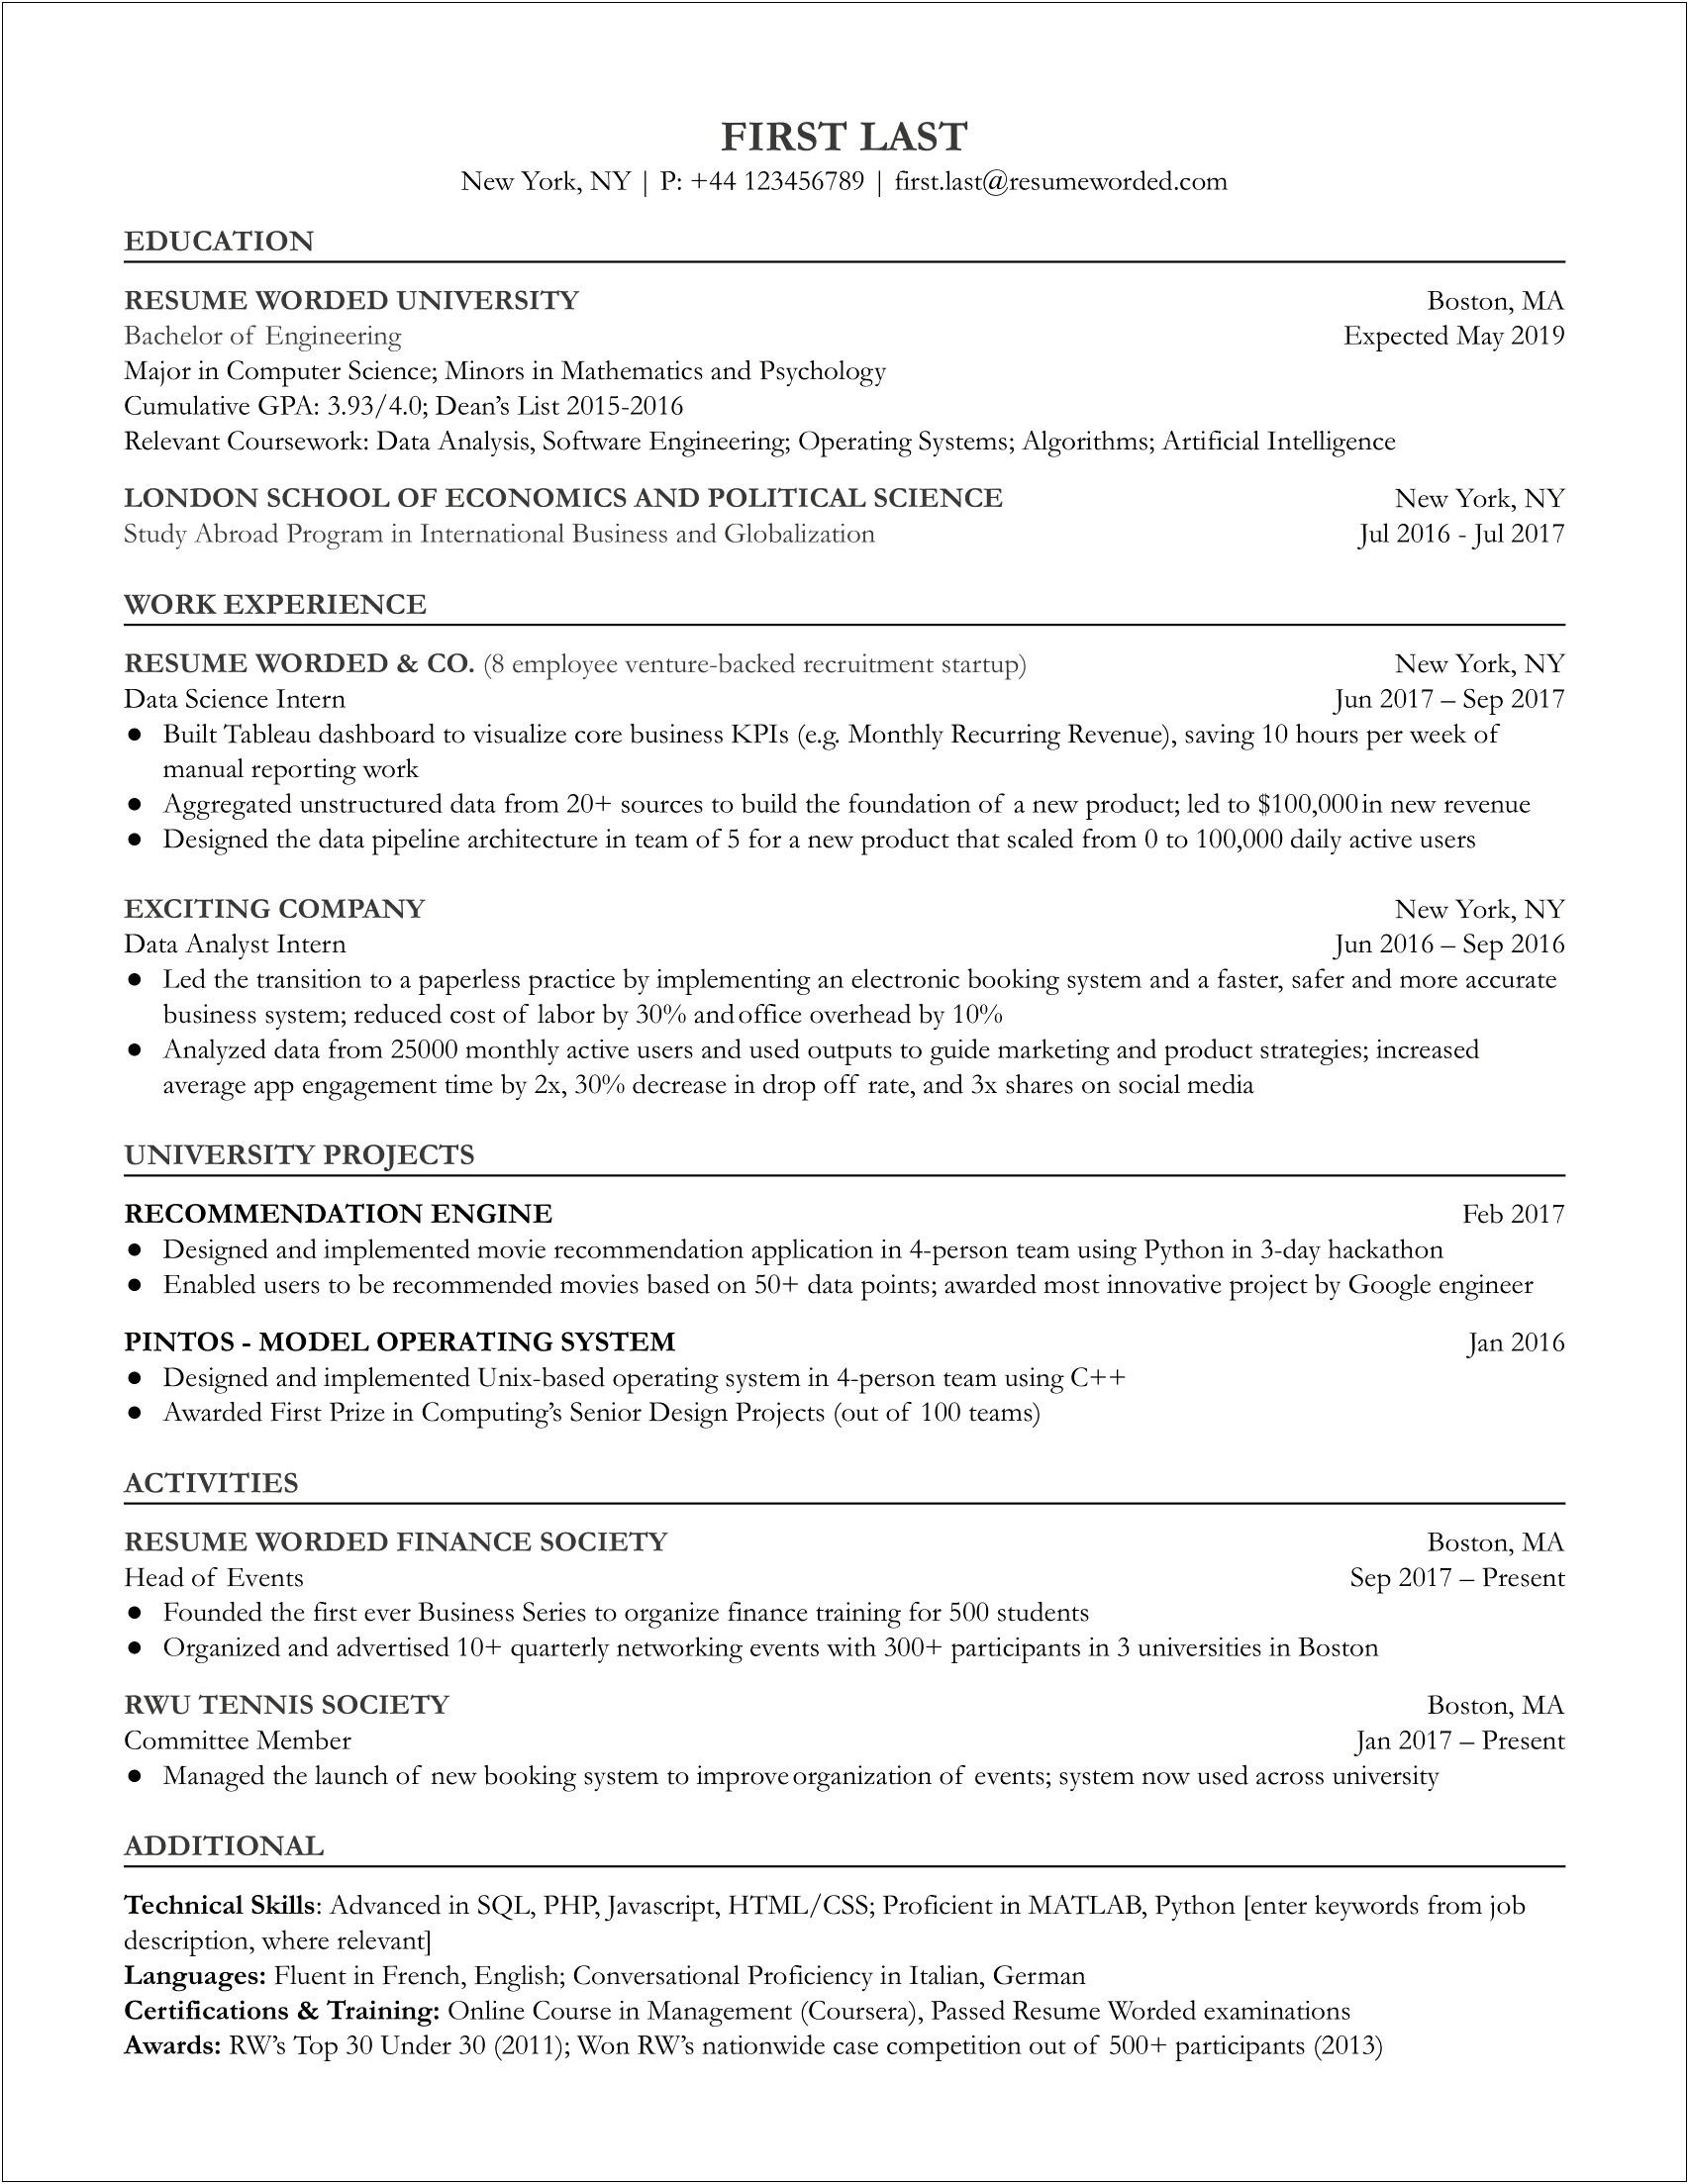 Entry Level Career Summary For Resume